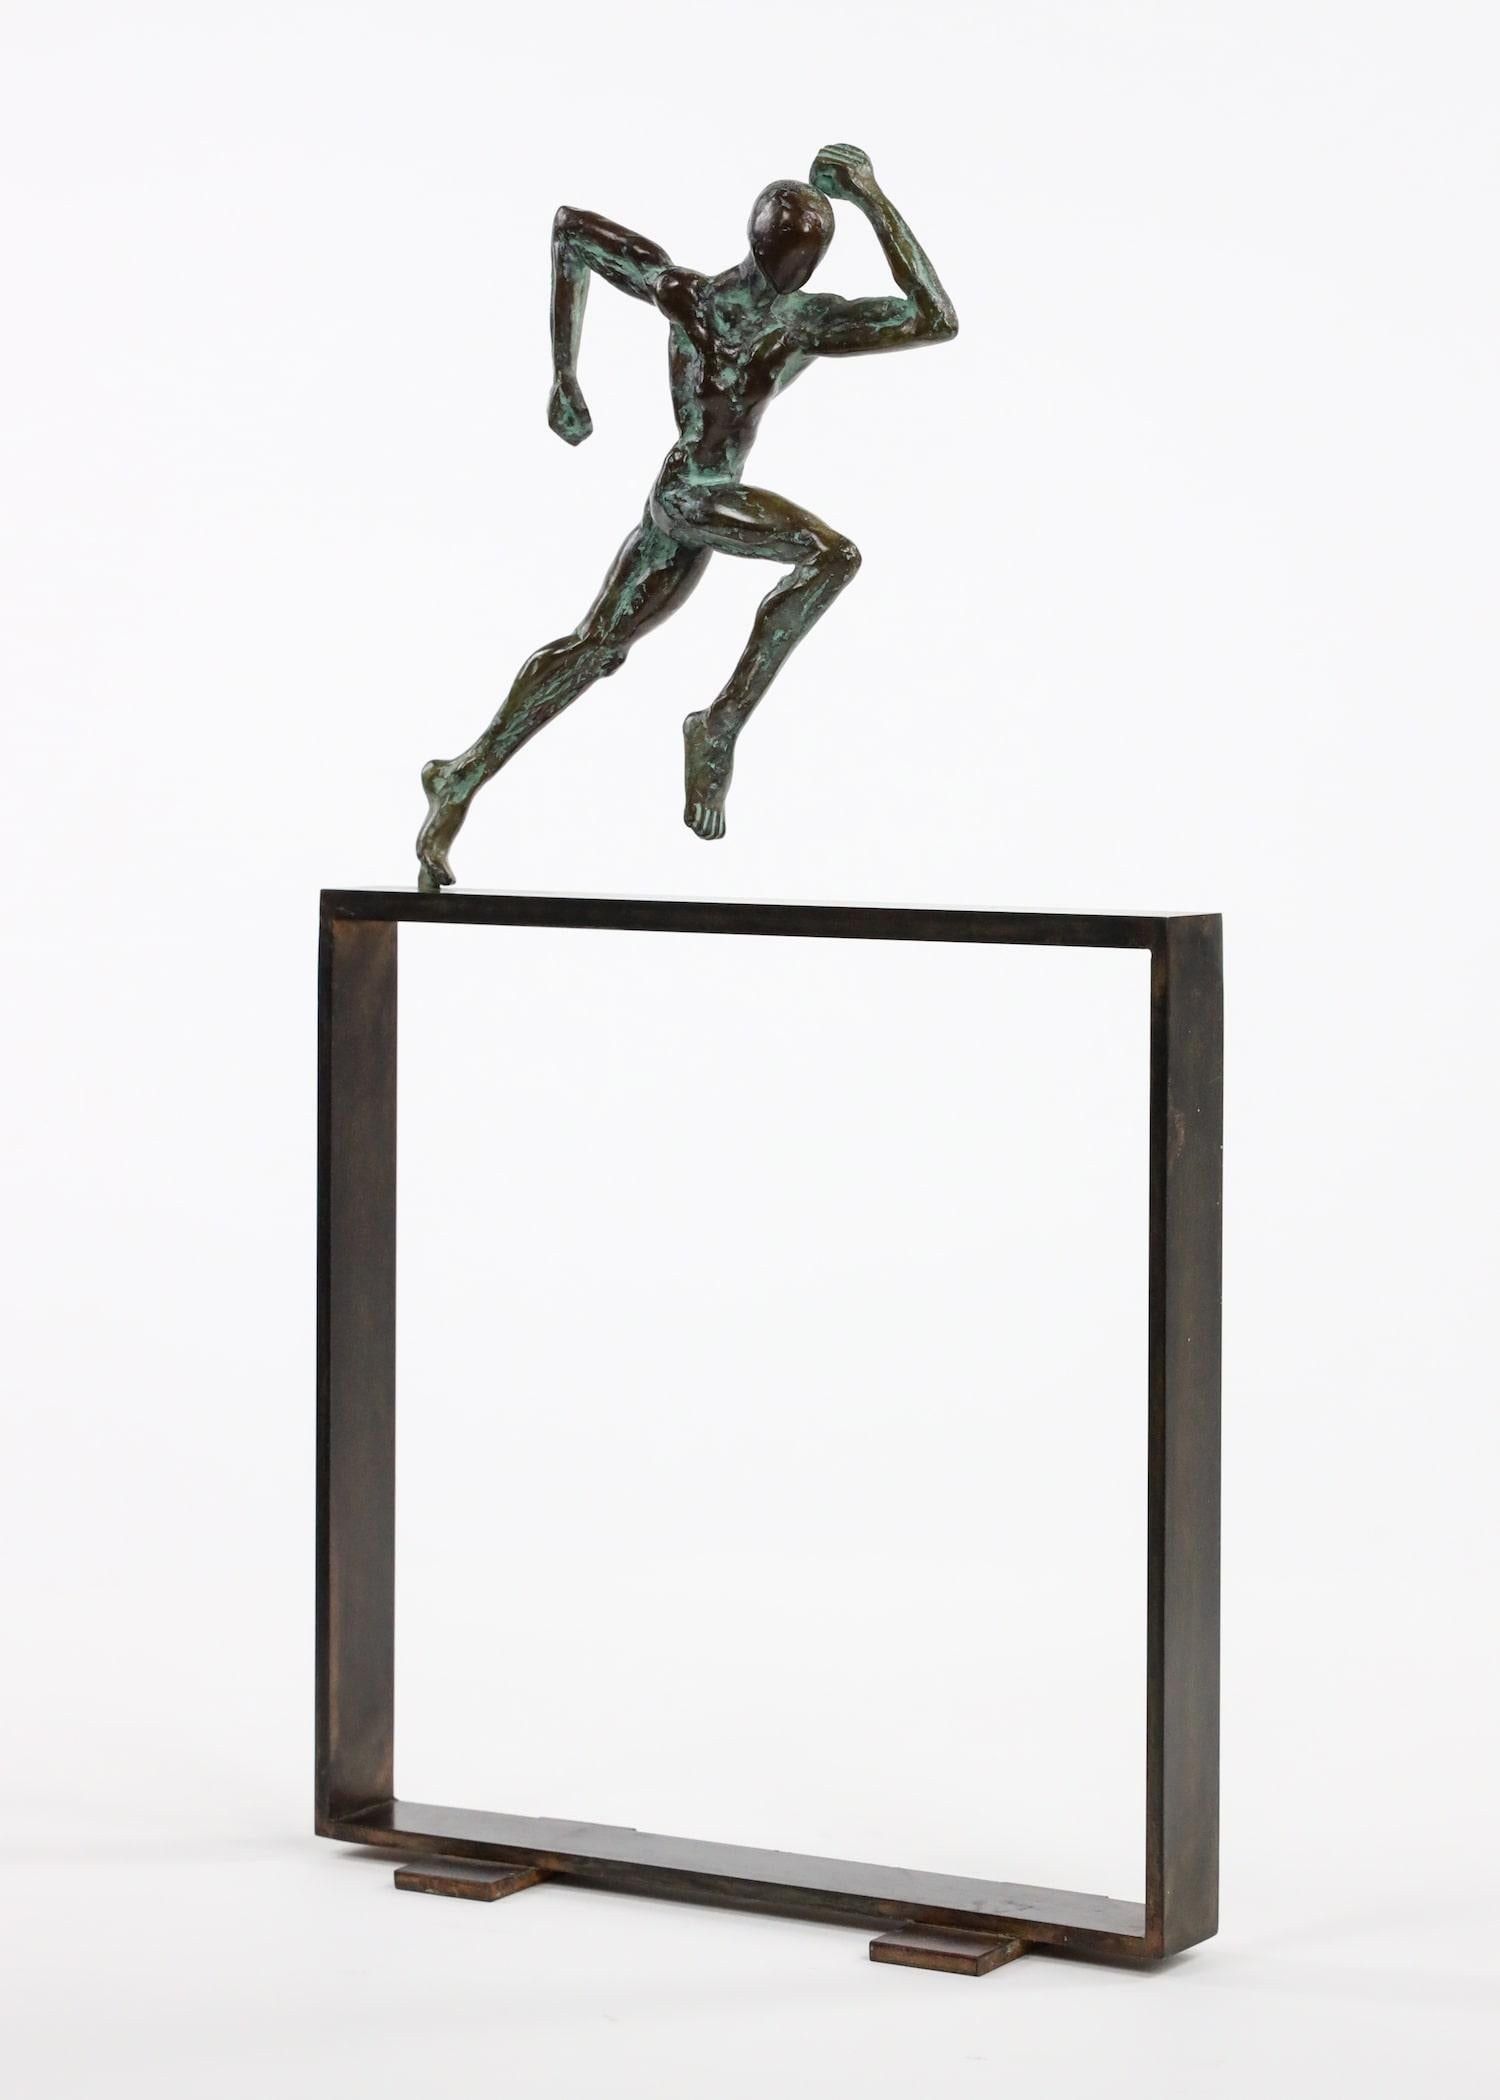 Small Runner "Start" II, bronze sculpture with metal plinth by French contemporary artist Yann Guillon.
Limited edition of 8 + 4 artist's proofs, signed and numbered.
Yann Guillon focuses his work on the human body, using an expressionist approach